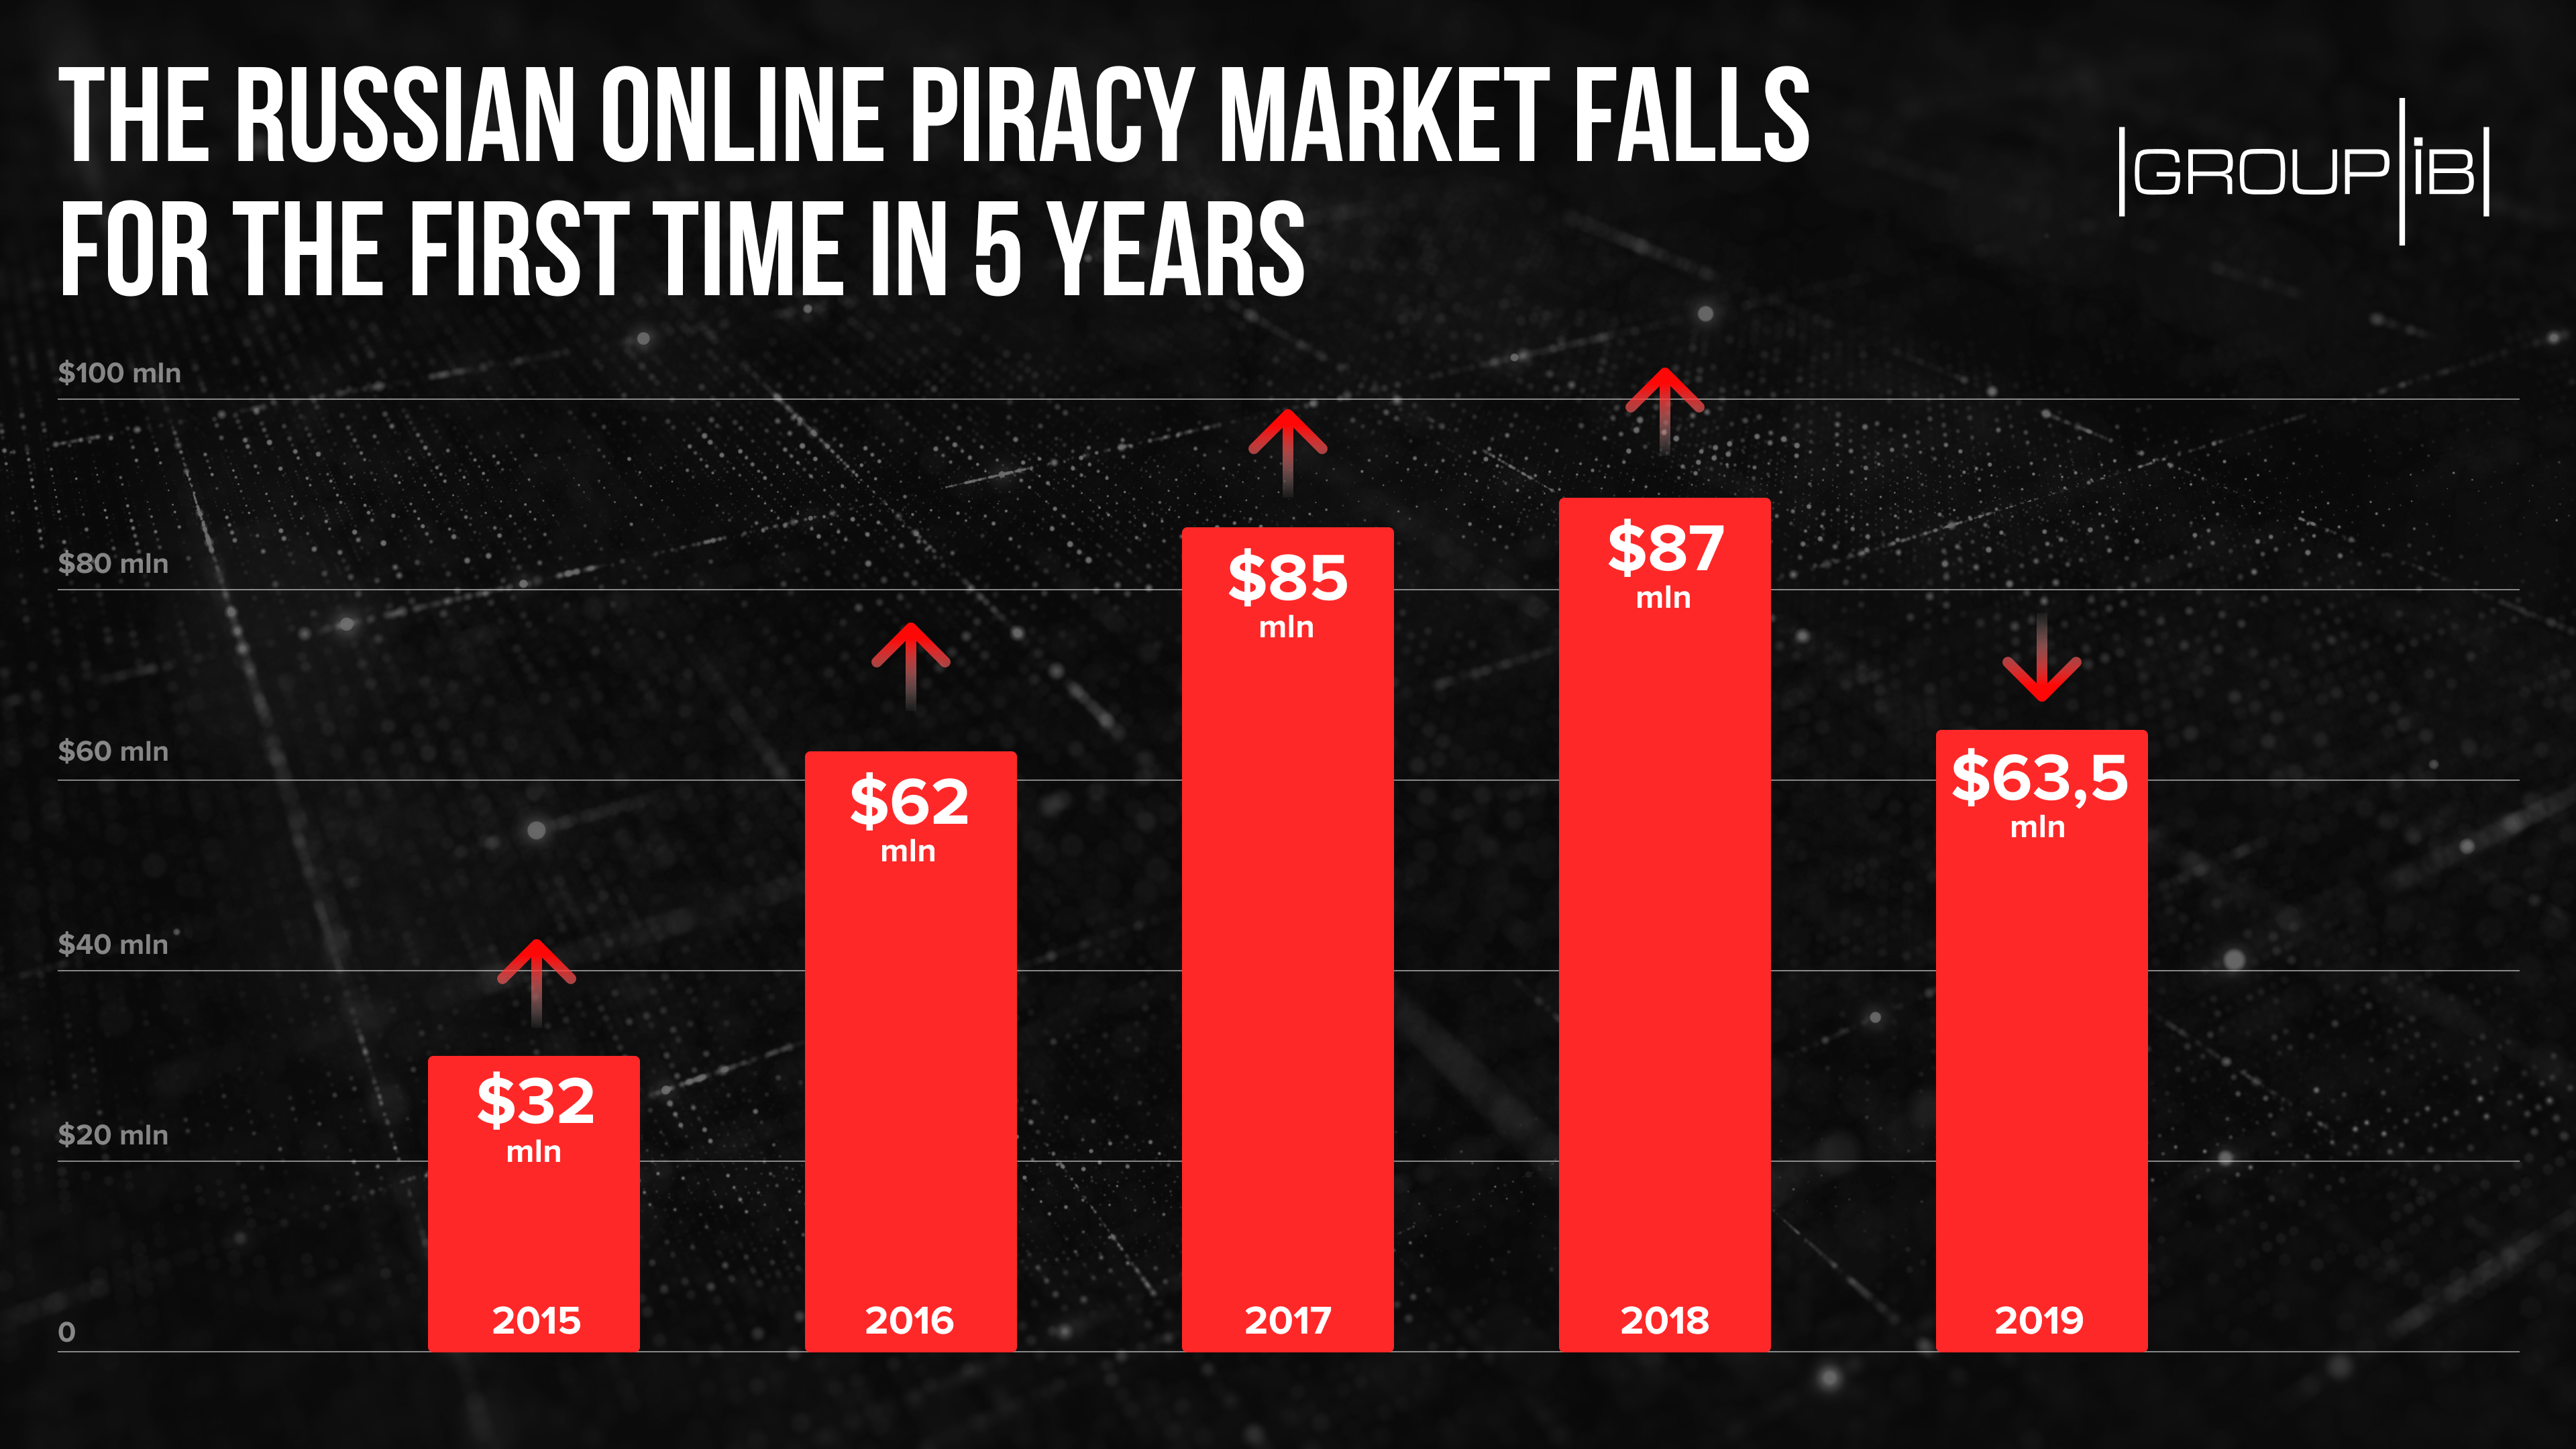 Pirate Sites Revenues in Russia Set to Plummet, First Fall in Five Years